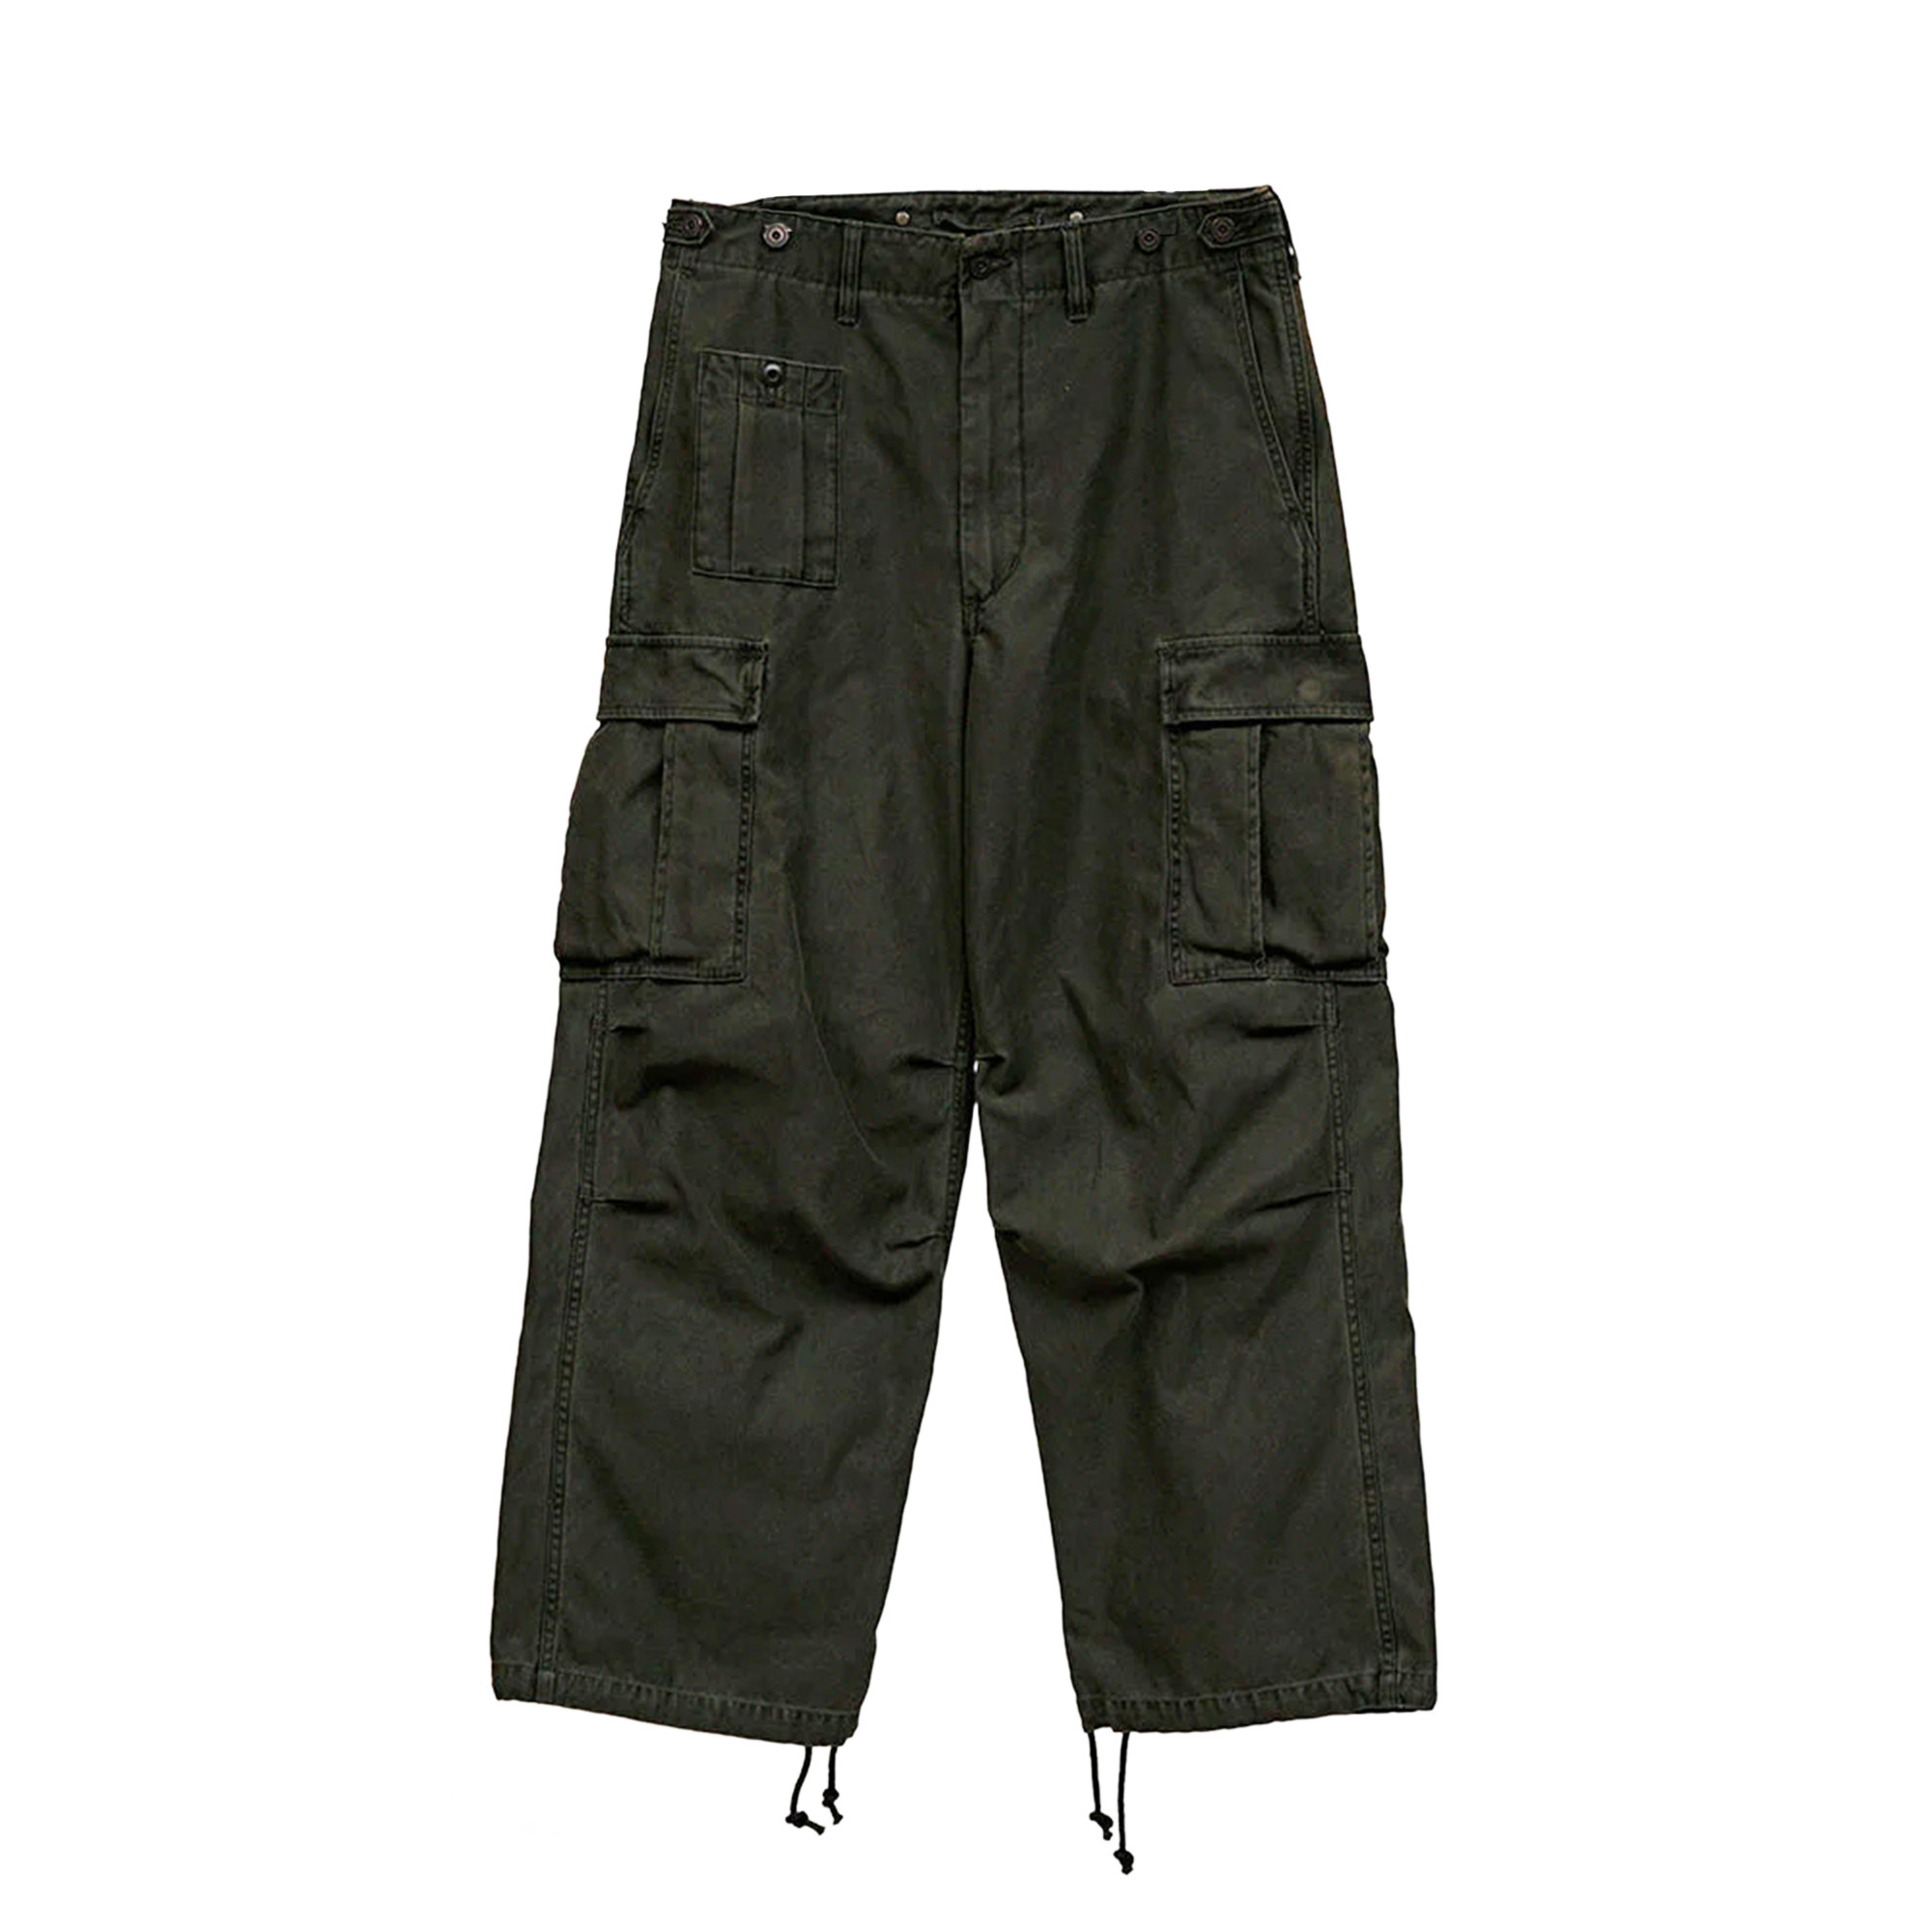 Nigel Cabourn - Army Cargo Pealing Print (Charcoal Gray